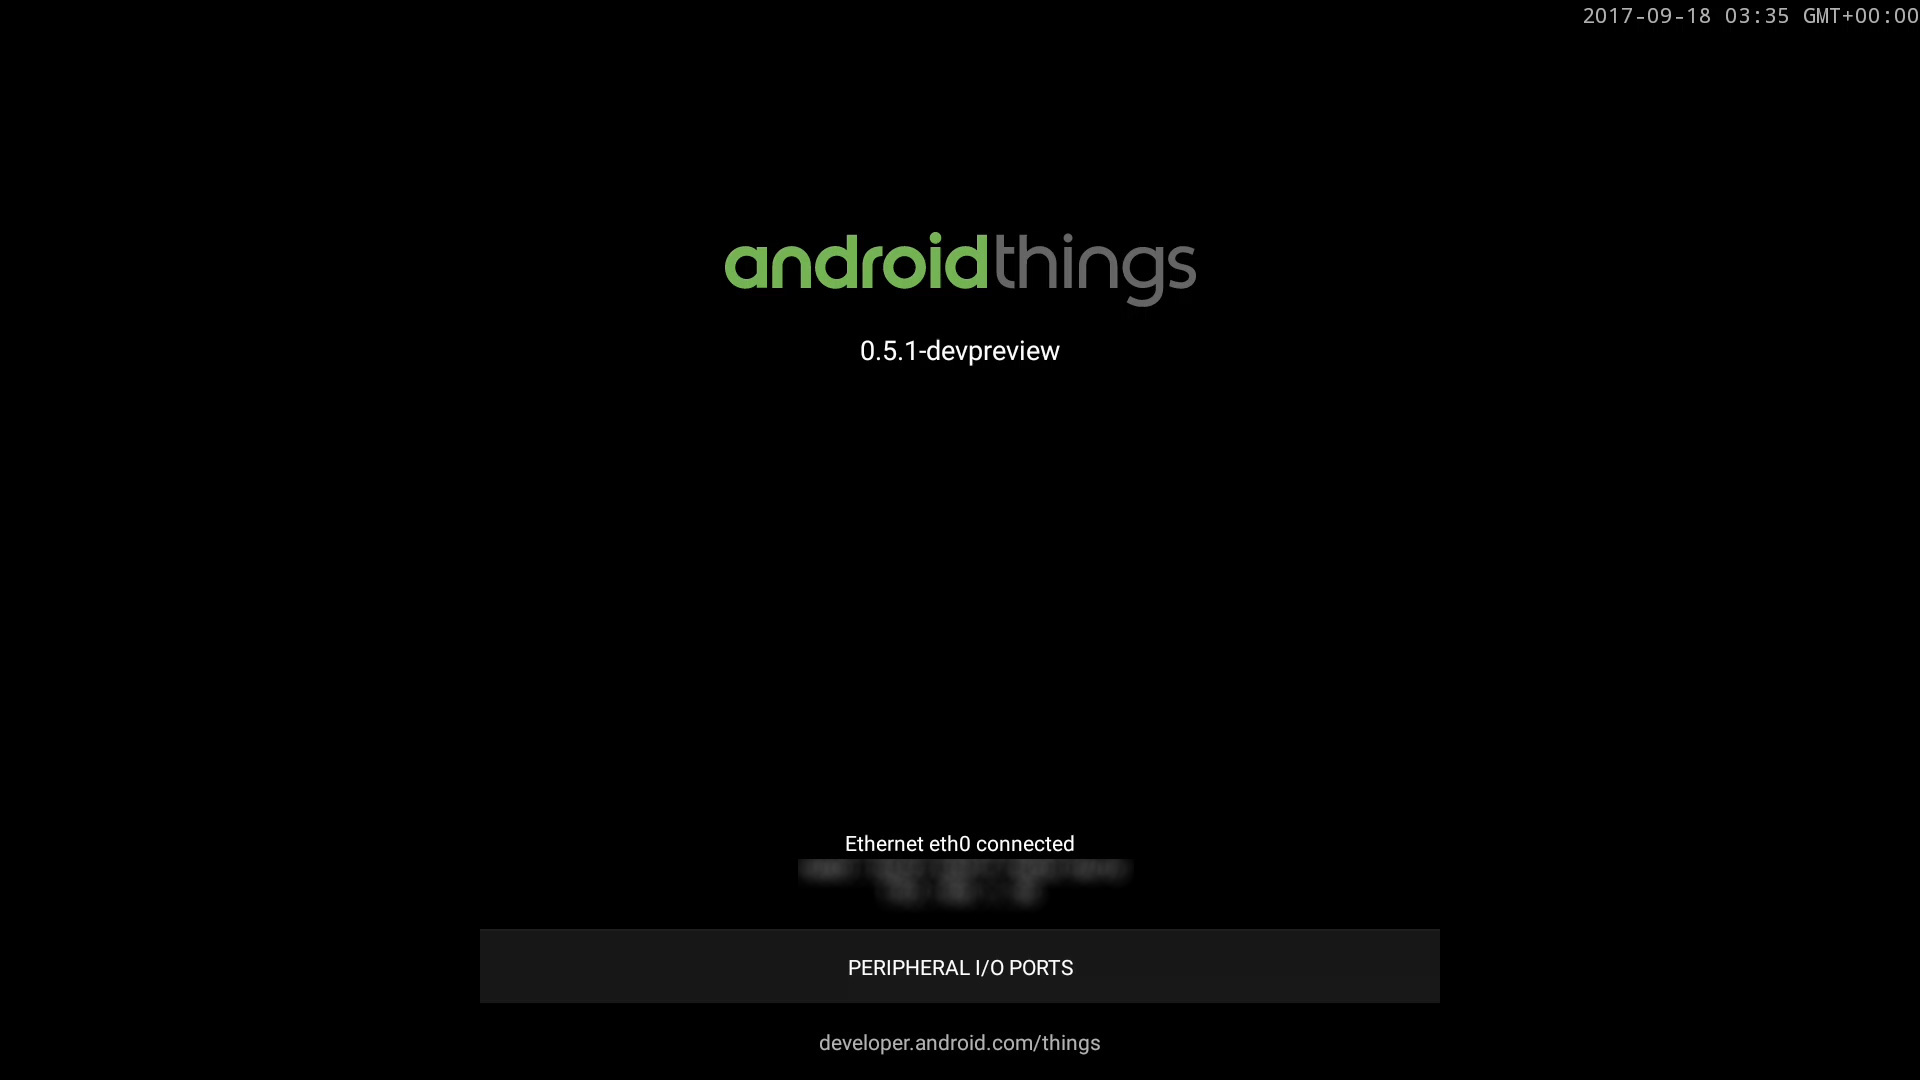 Android Things v0.5.1 devpreview